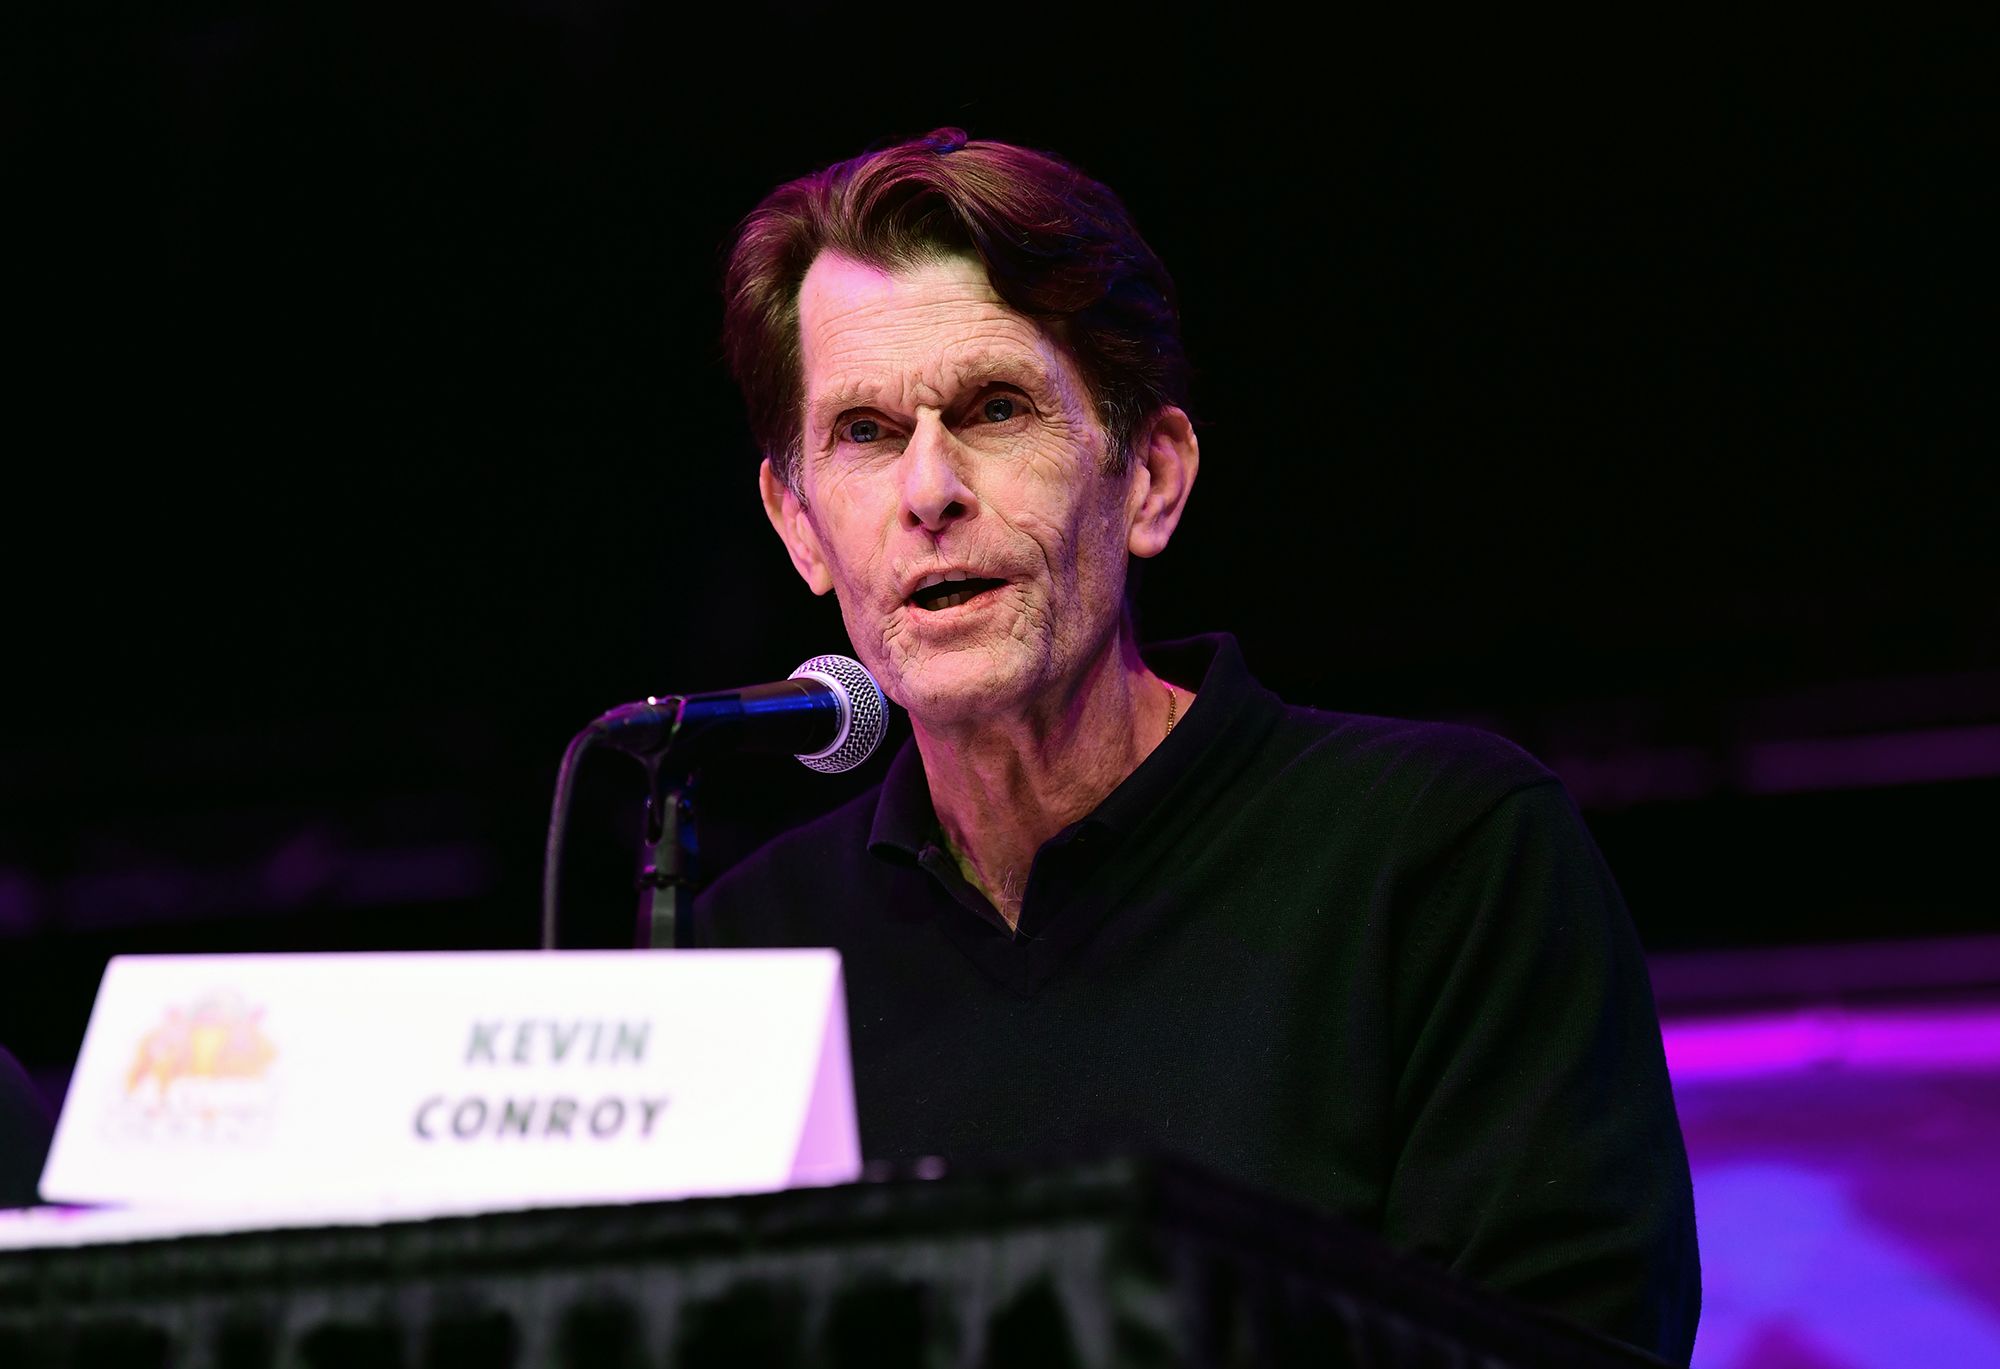 Kevin Conroy, best known as voice of Batman, dies at 66